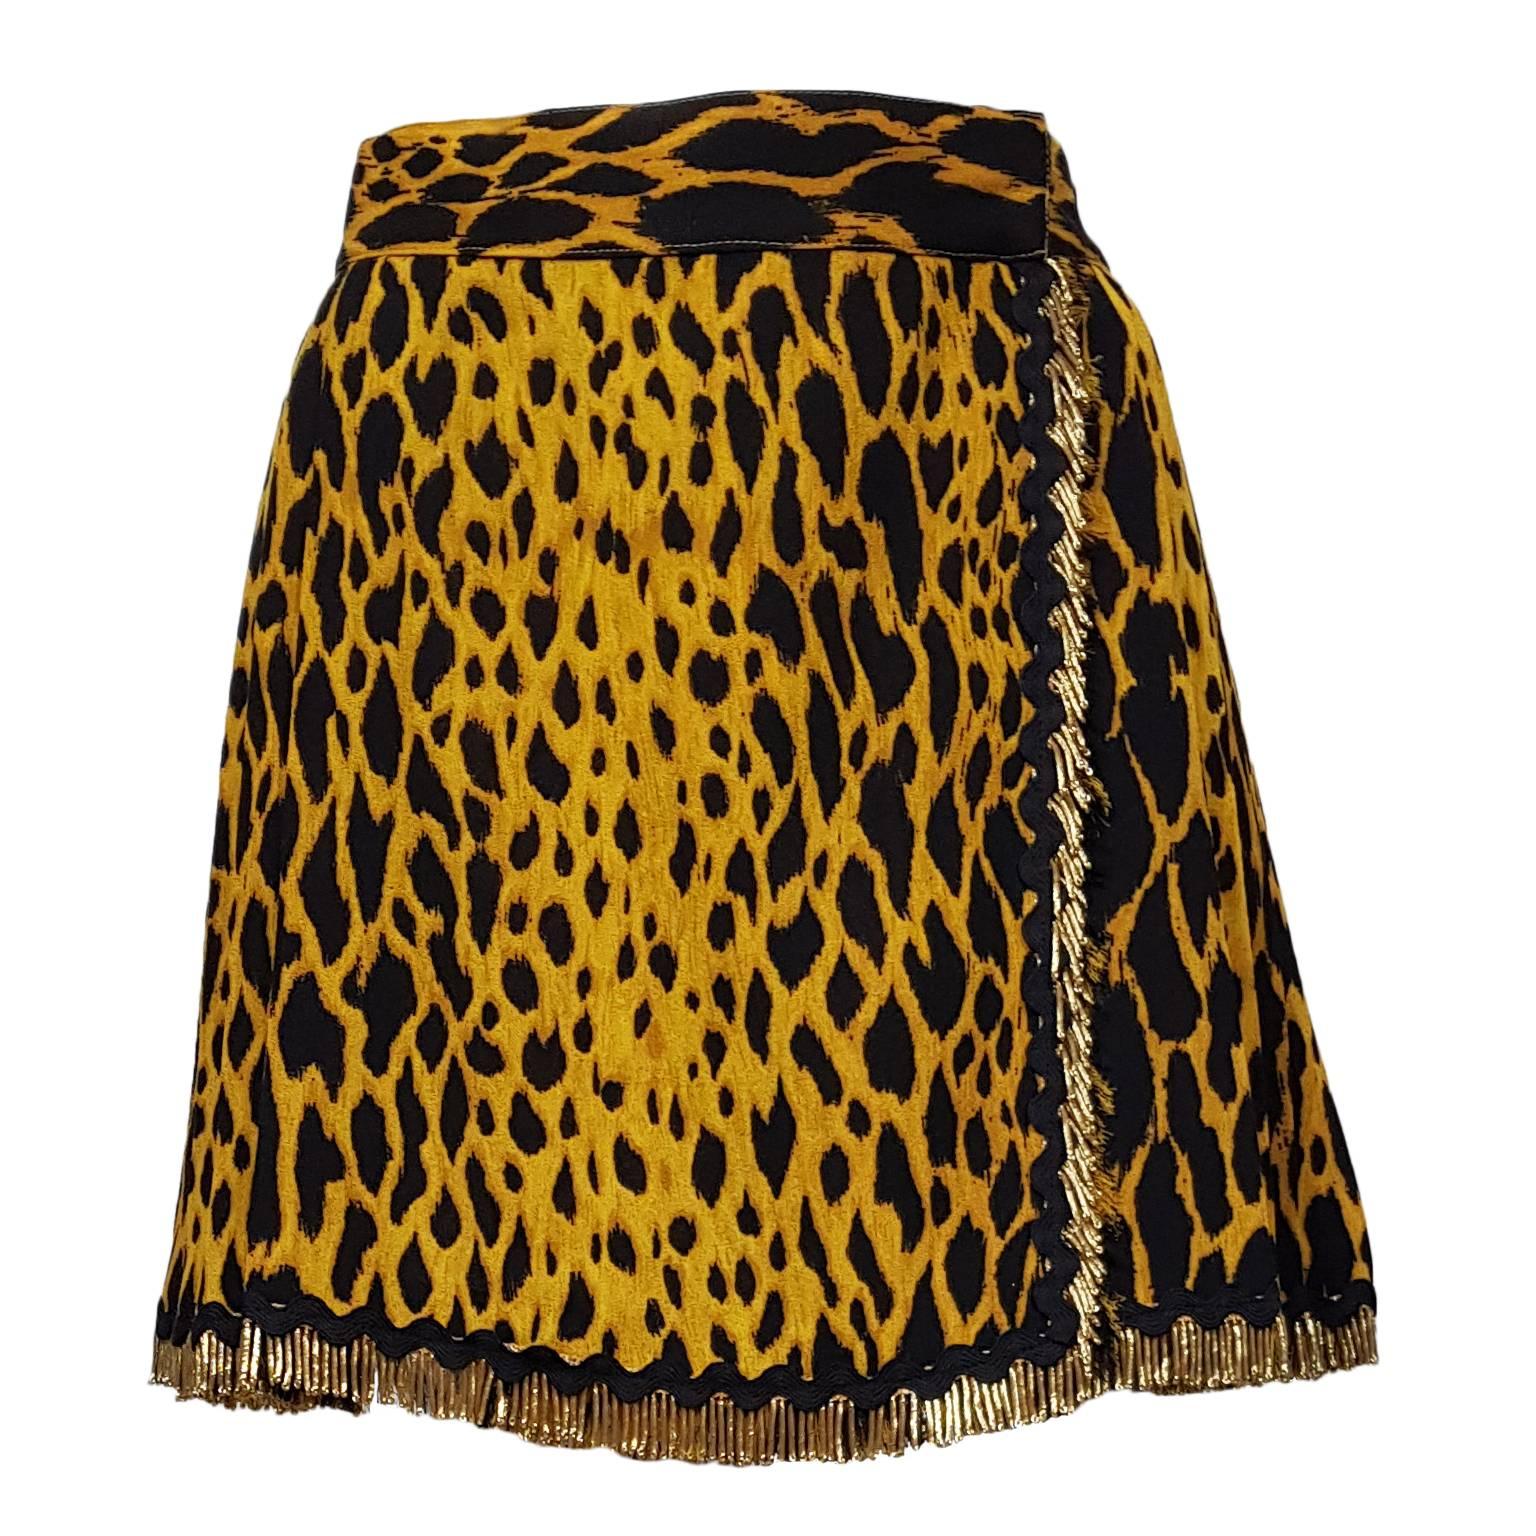 Gianni Versace Couture Leopard Golden Fringe Skirt 1990s. For Sale